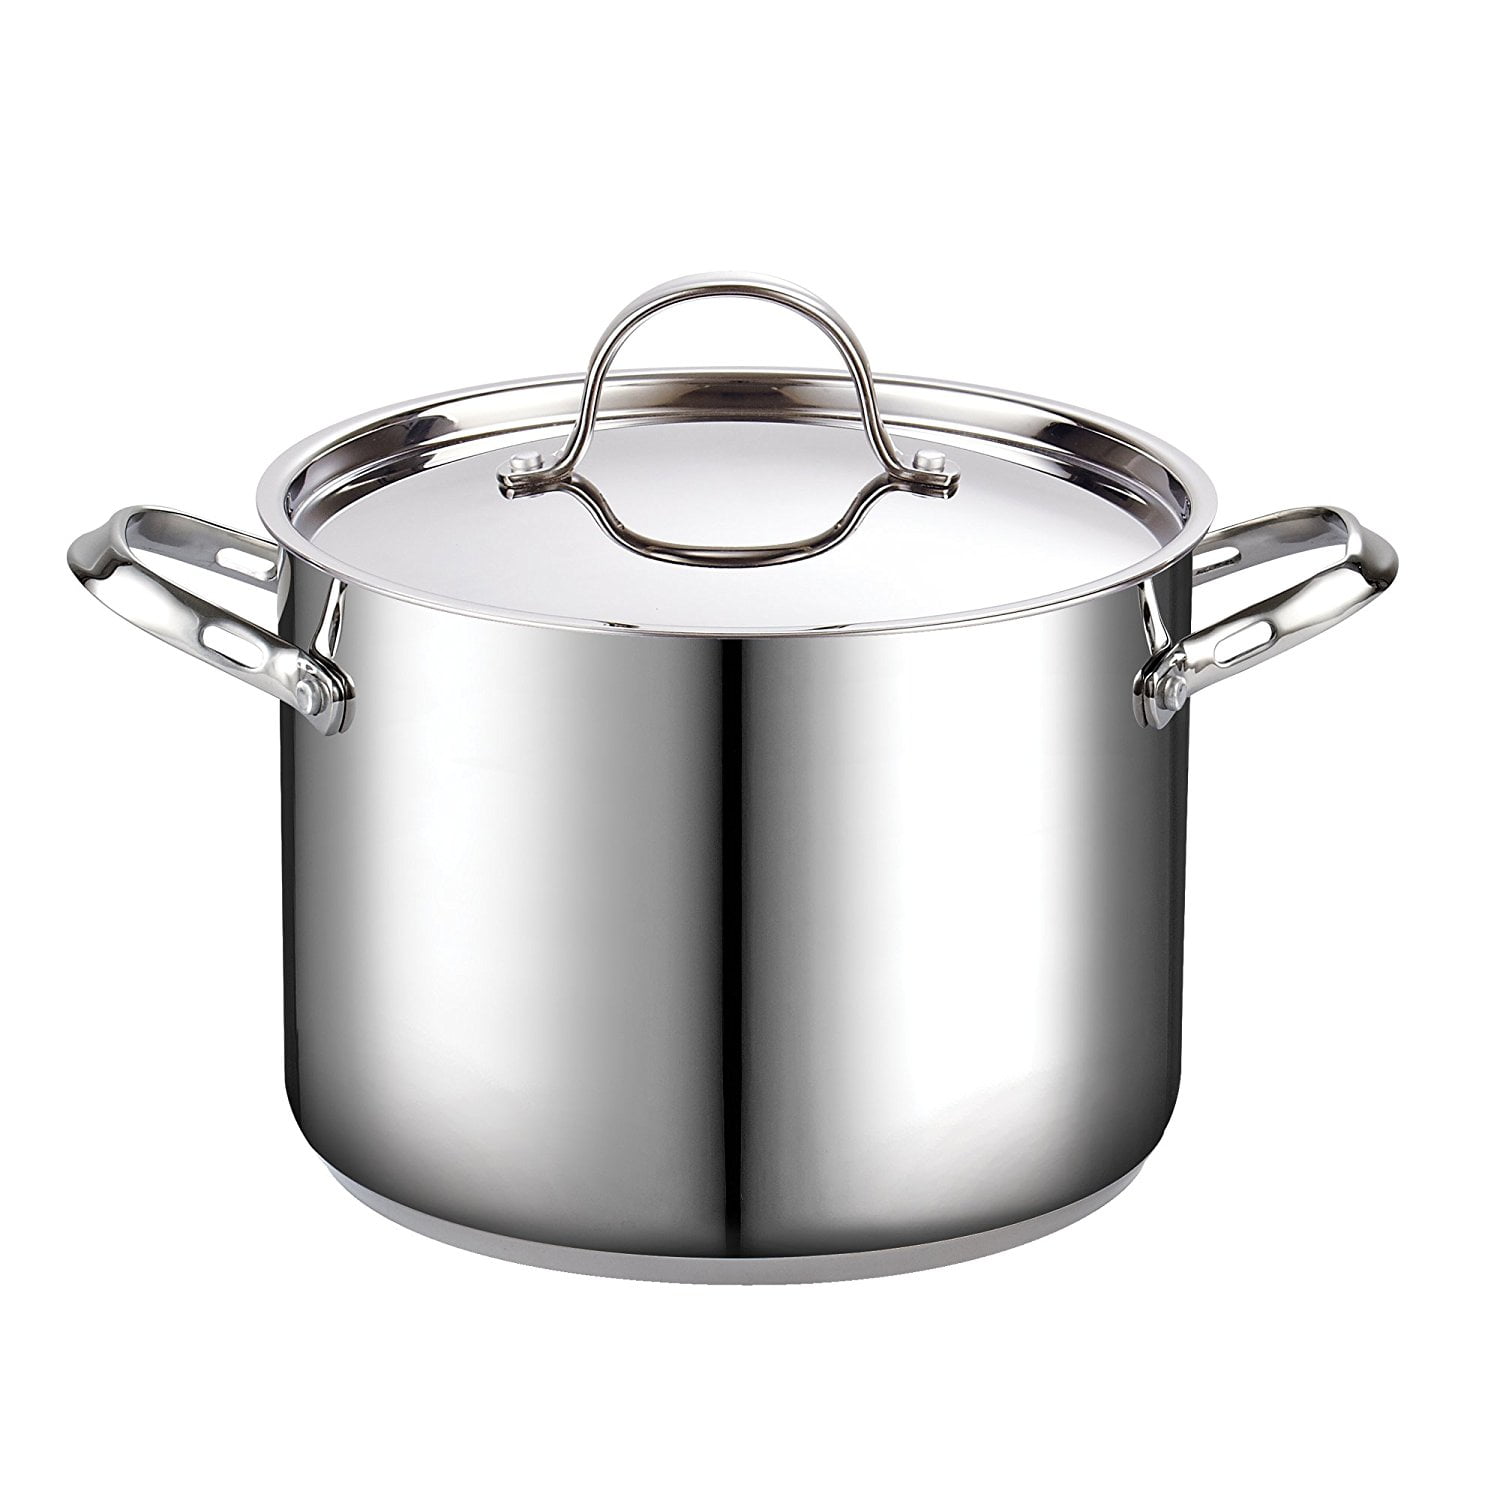 Details about   Stainless Steel Stock Pot Lid Cooking Kitchen Soup Stew Sauce Stockpot Two Sizes 